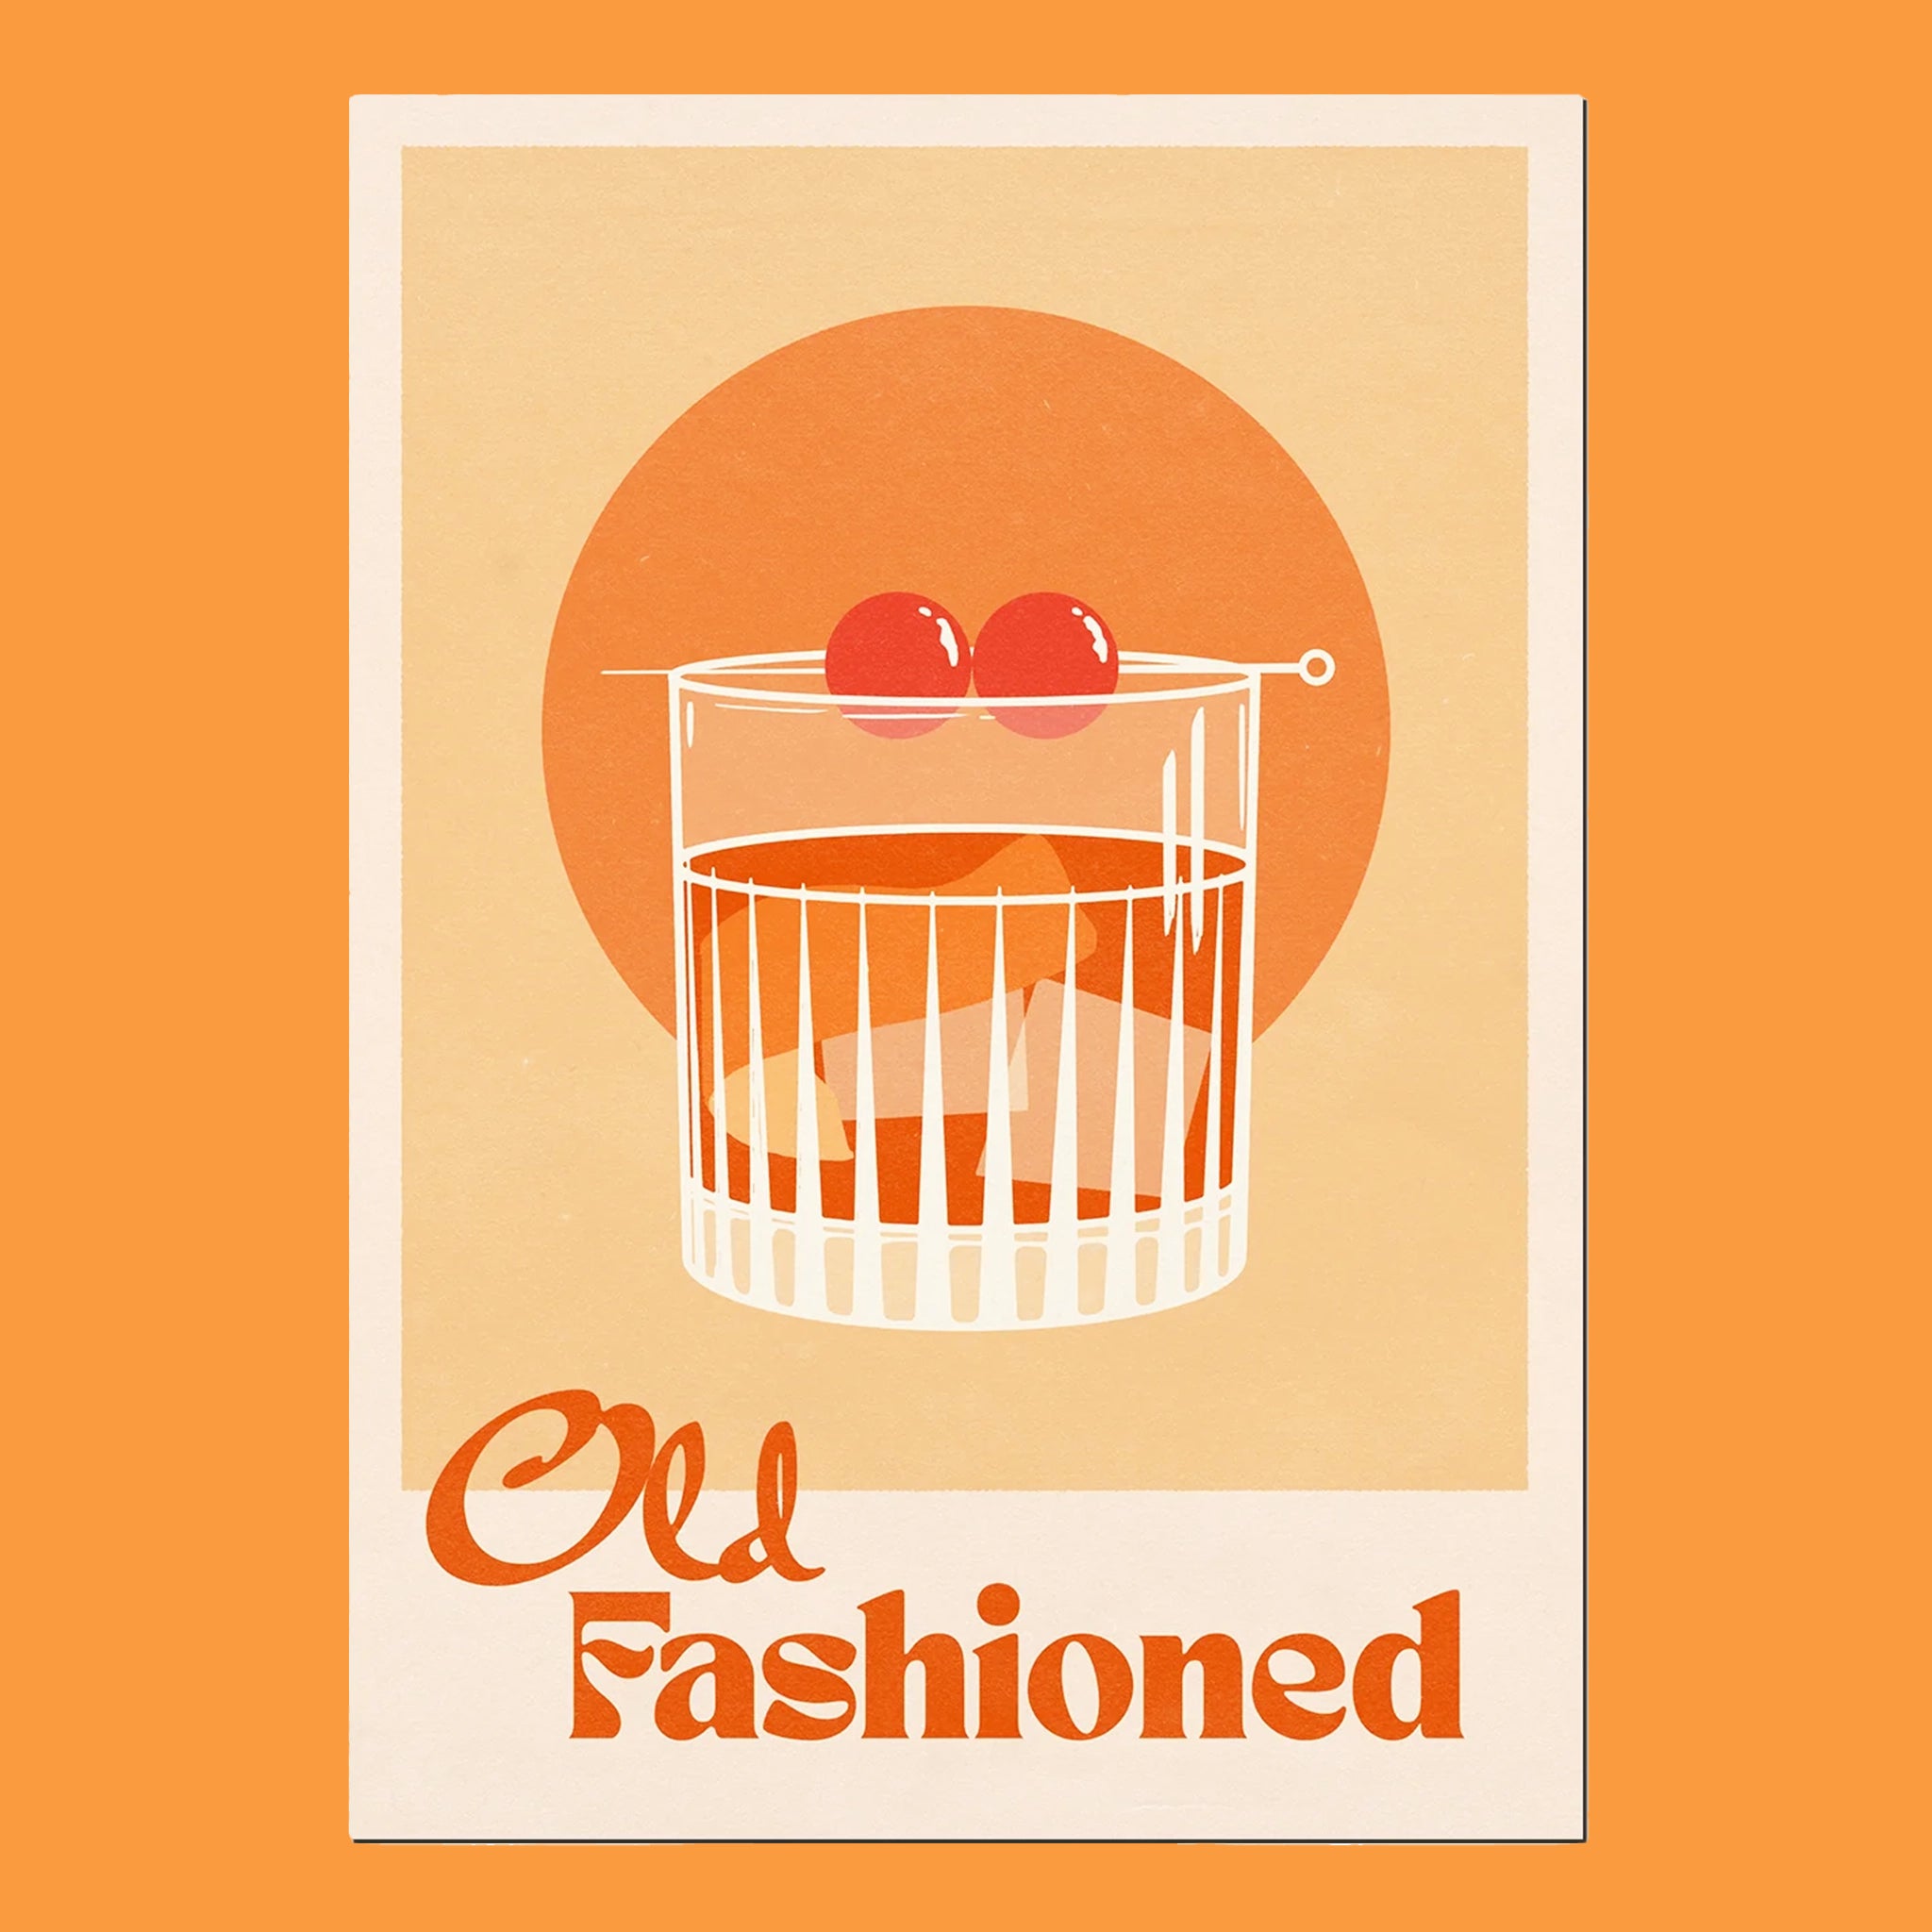 On an orange background is an orange art print with an ivory border and a graphic of an old fashioned cocktail and orange text that reads, "Old Fashioned".